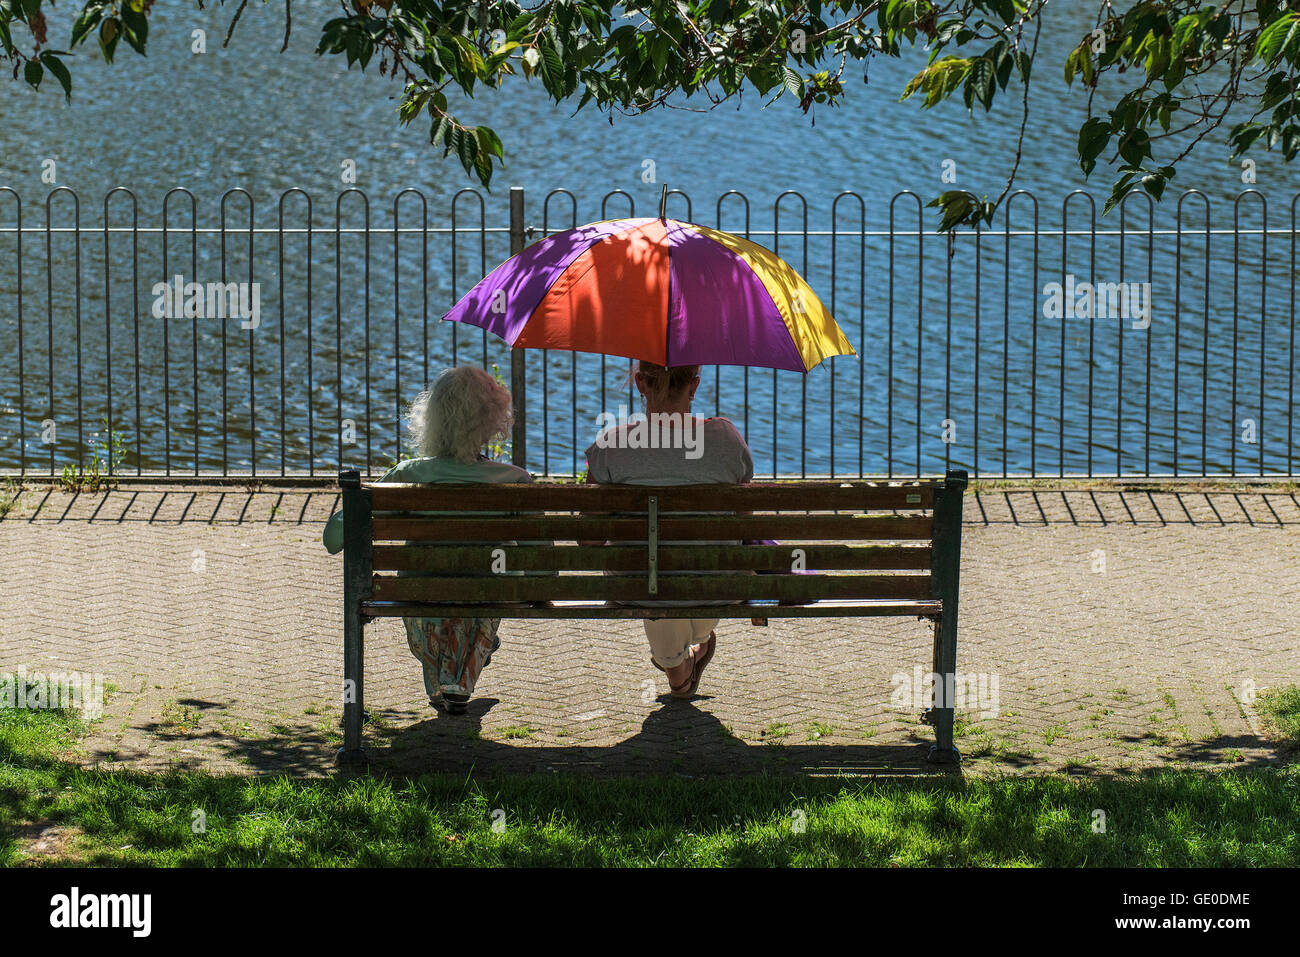 Two women relax in the shade under a colourful umbrella during bright summer sunshine. Stock Photo